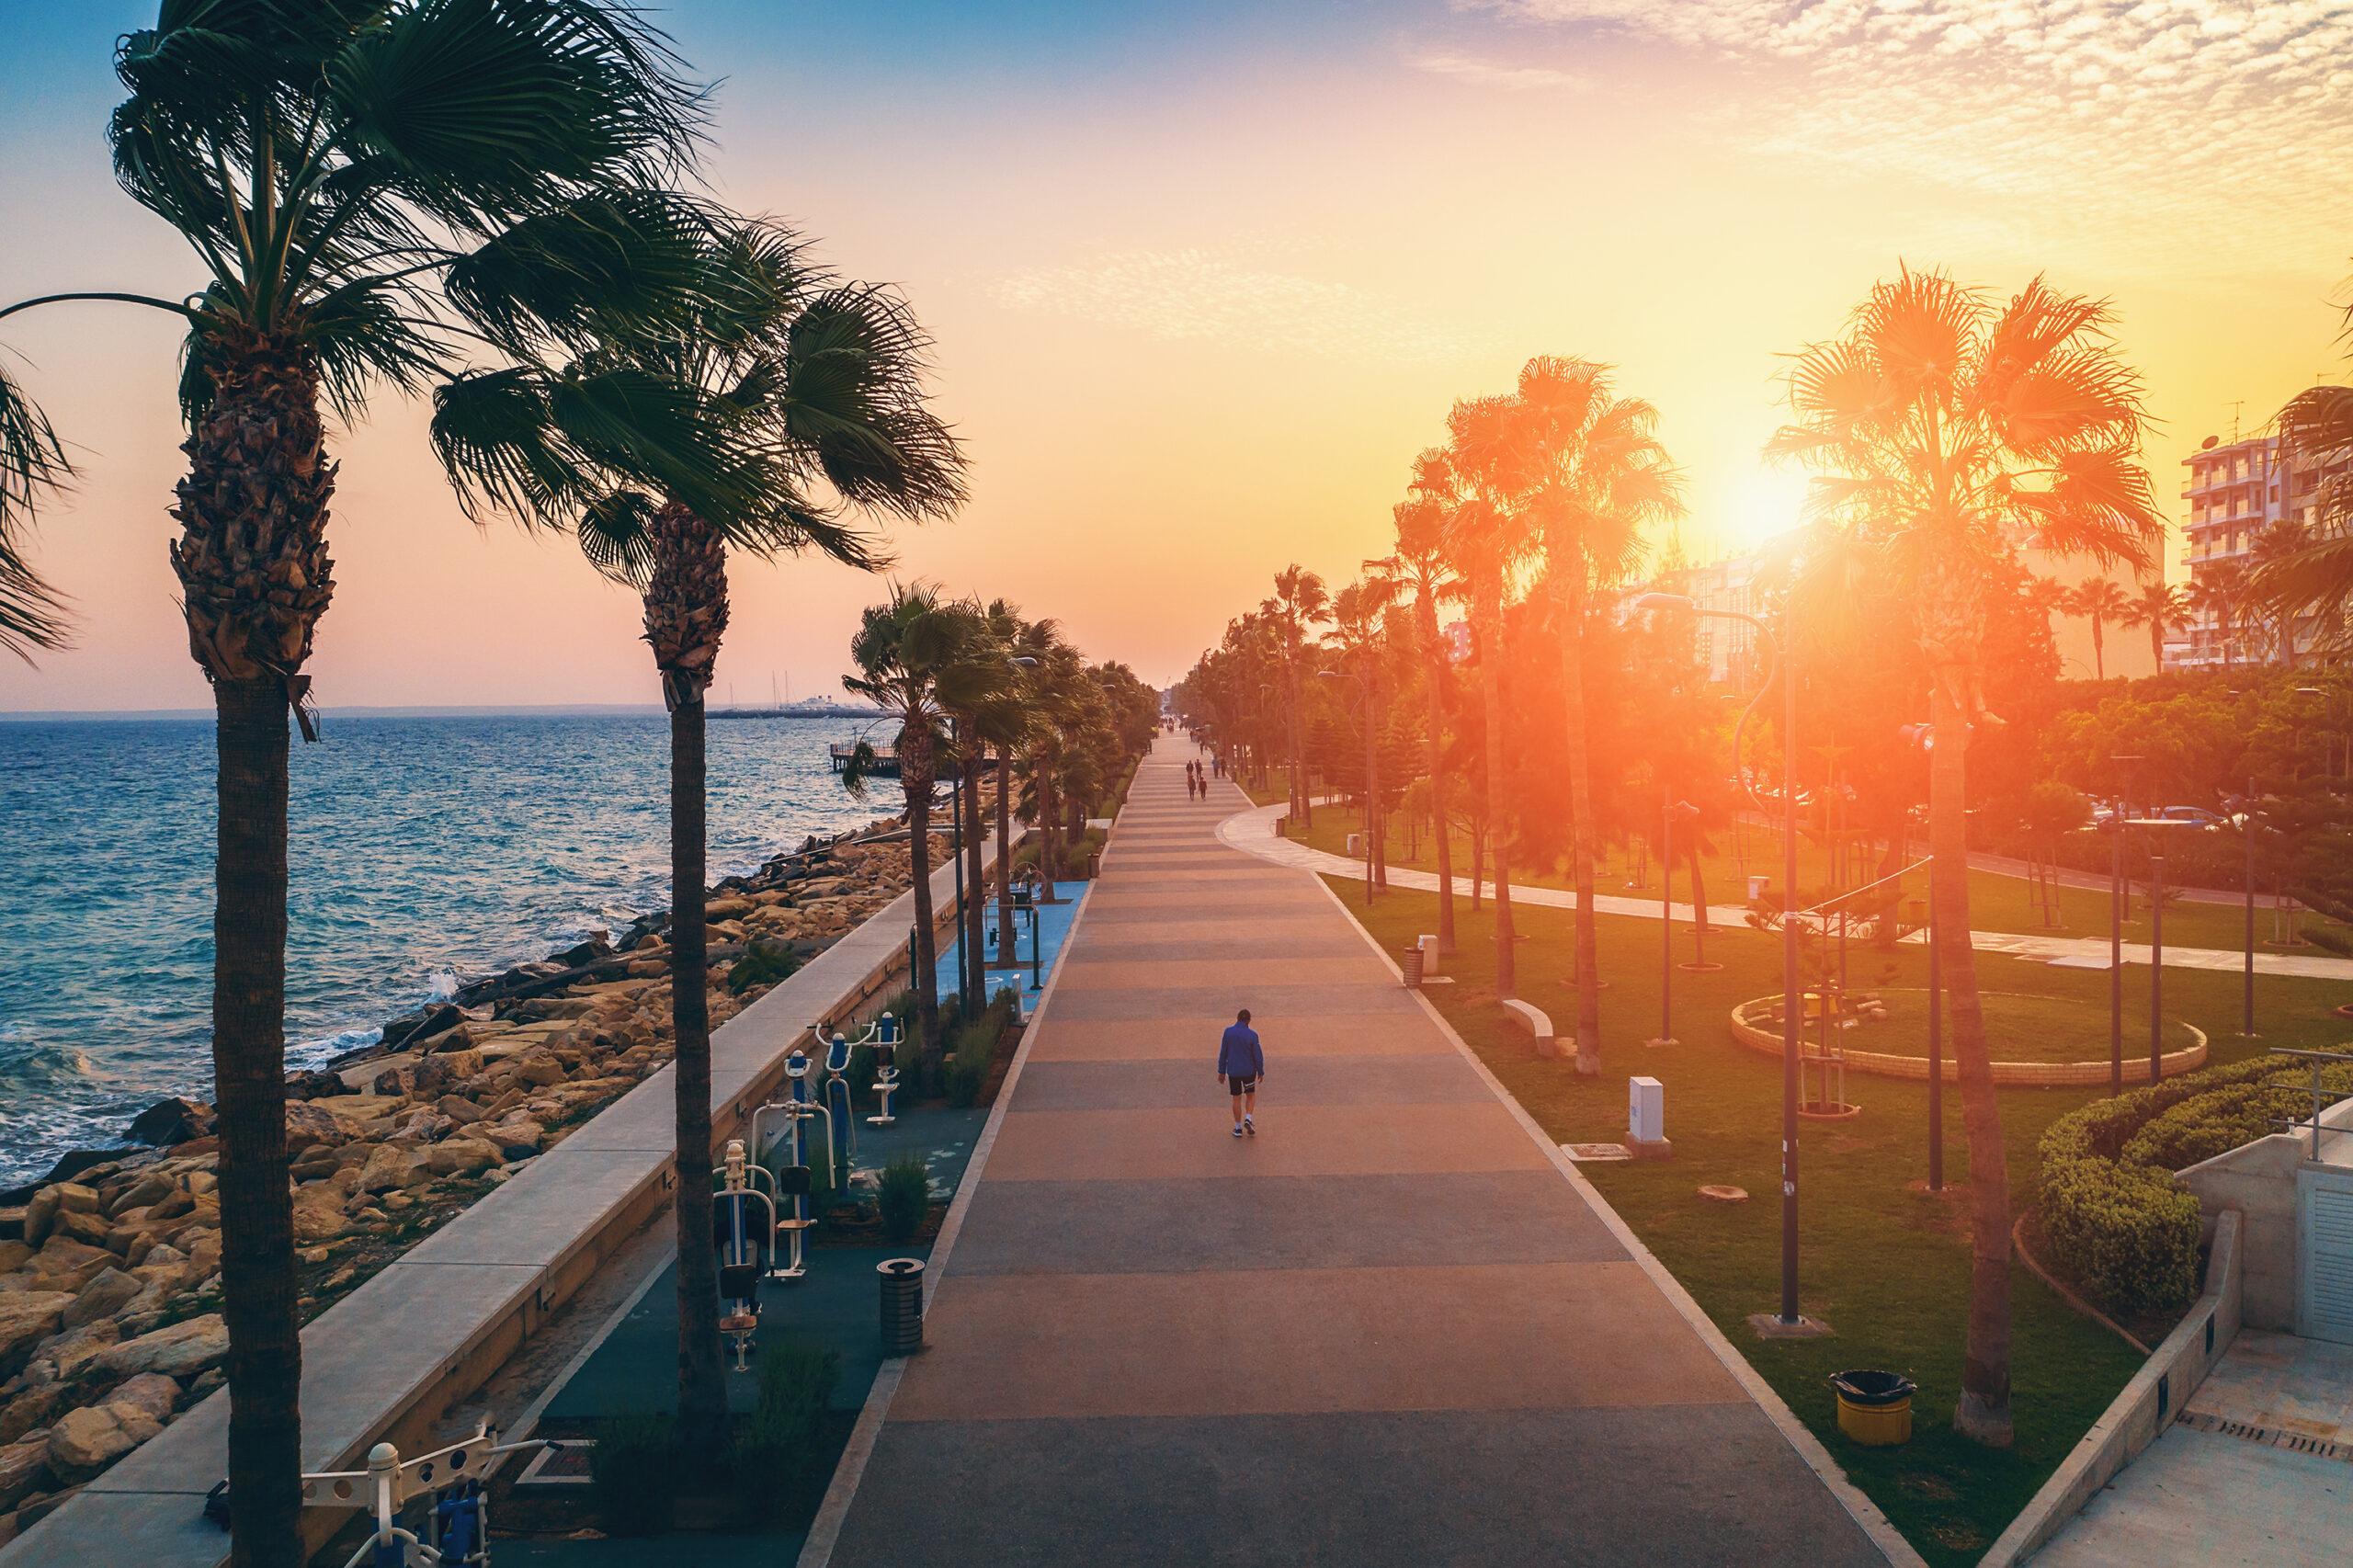 Promenade or embankment at sunset. Aerial view of alley with palms trees.